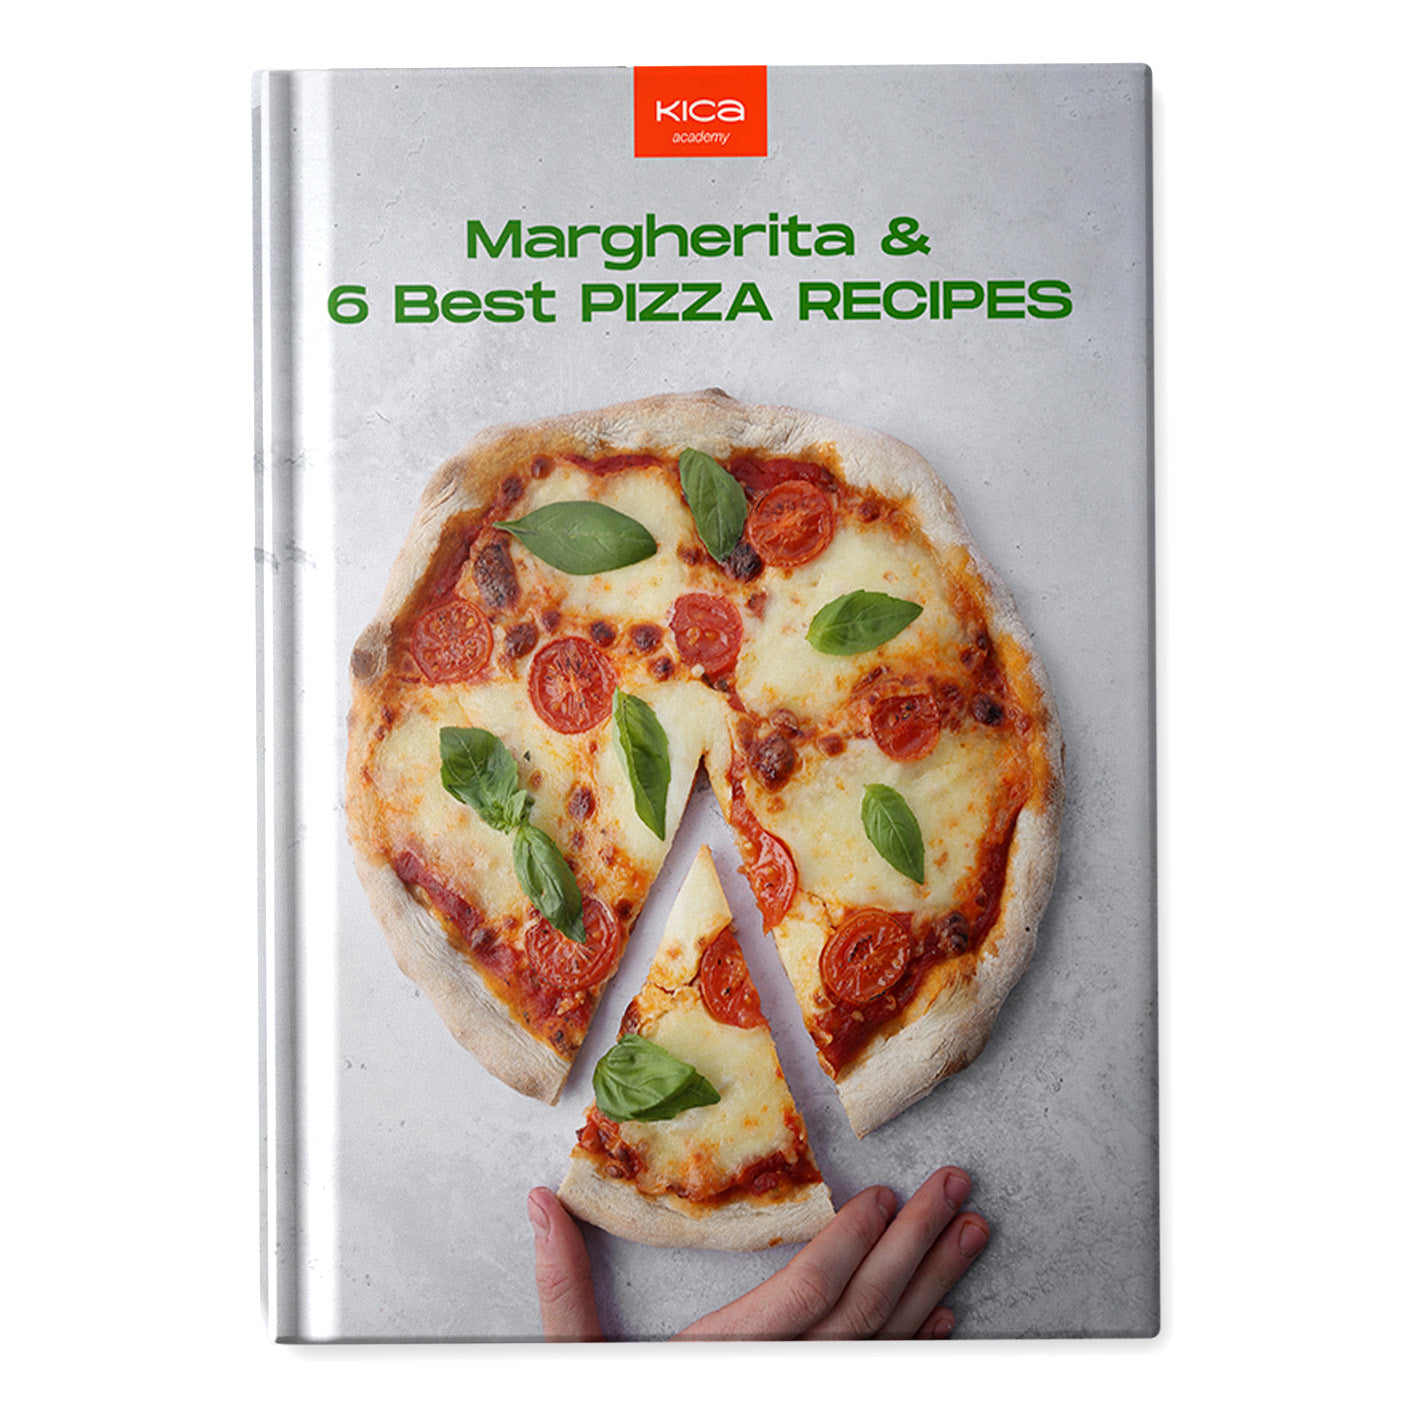 Margherita and 6 best pizza recipes